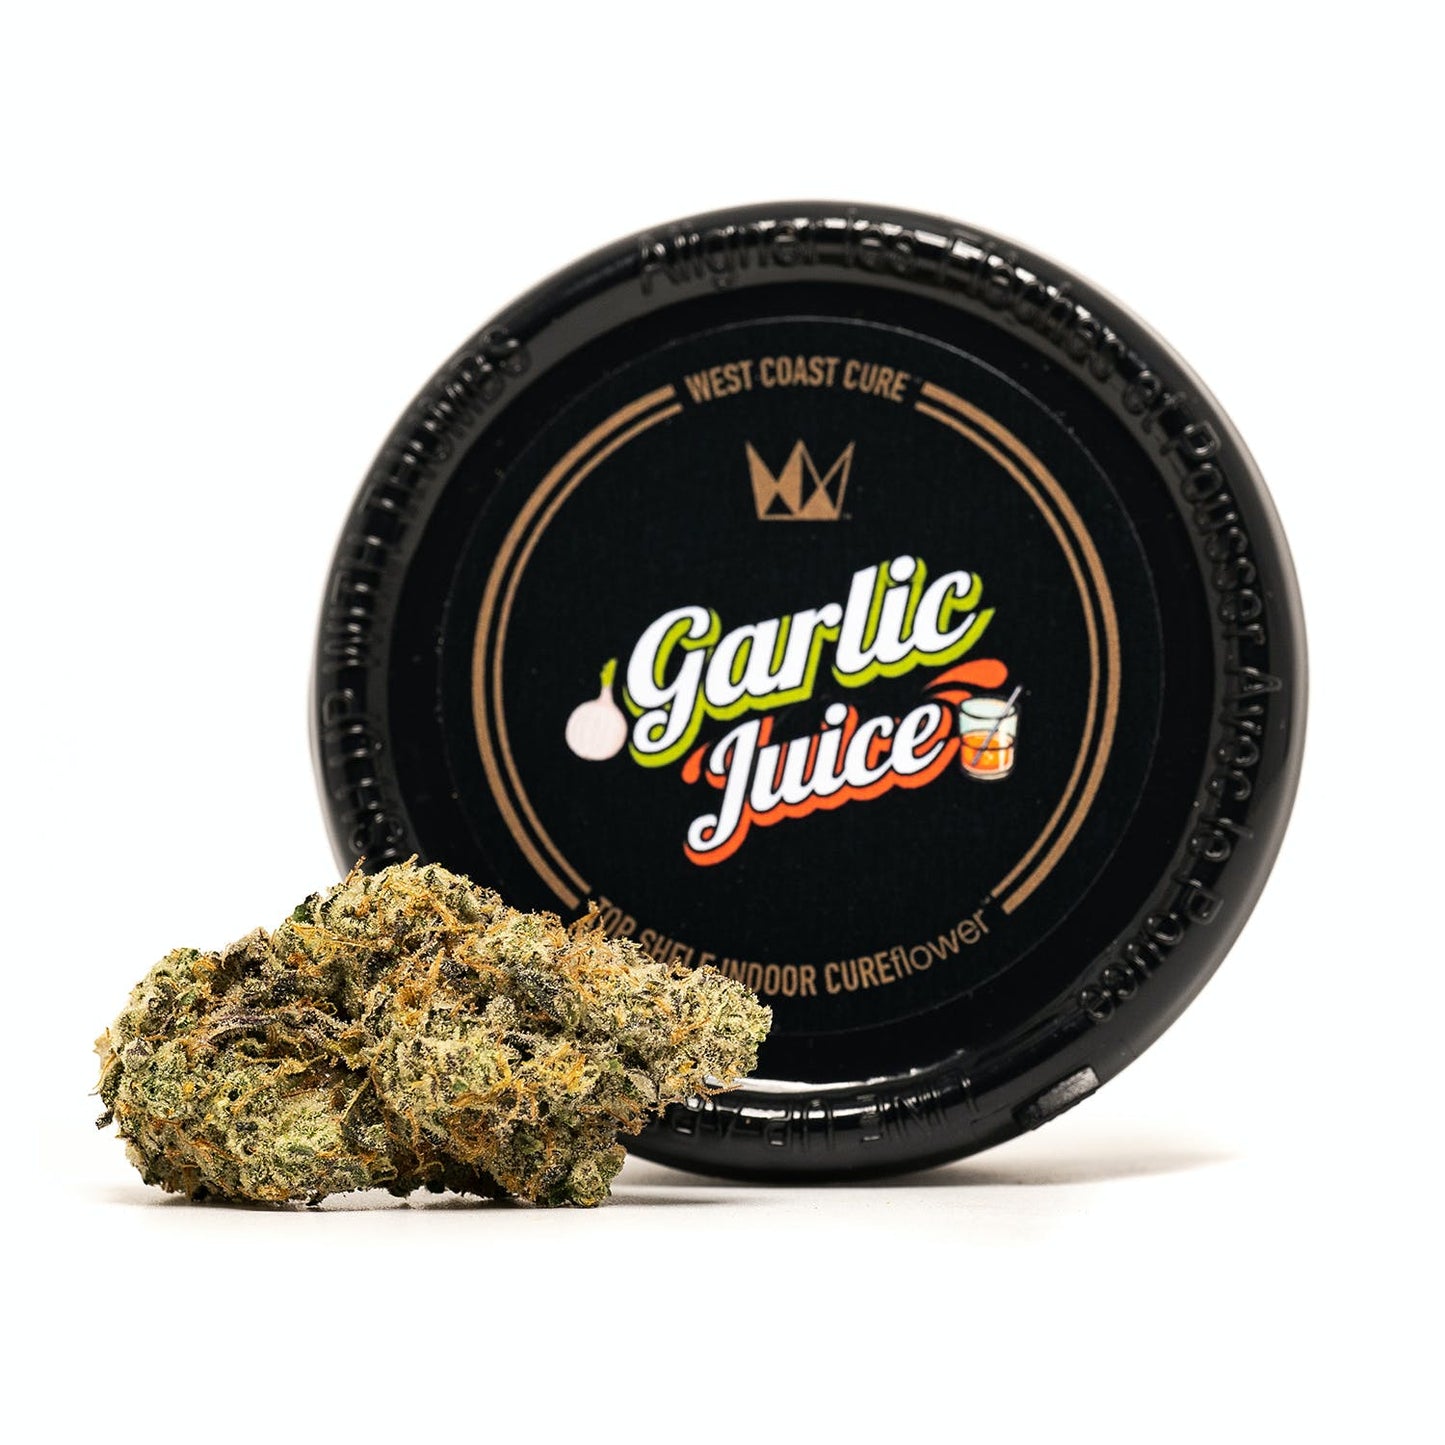 West Coast Cure Exotic Flower (Tax Included)